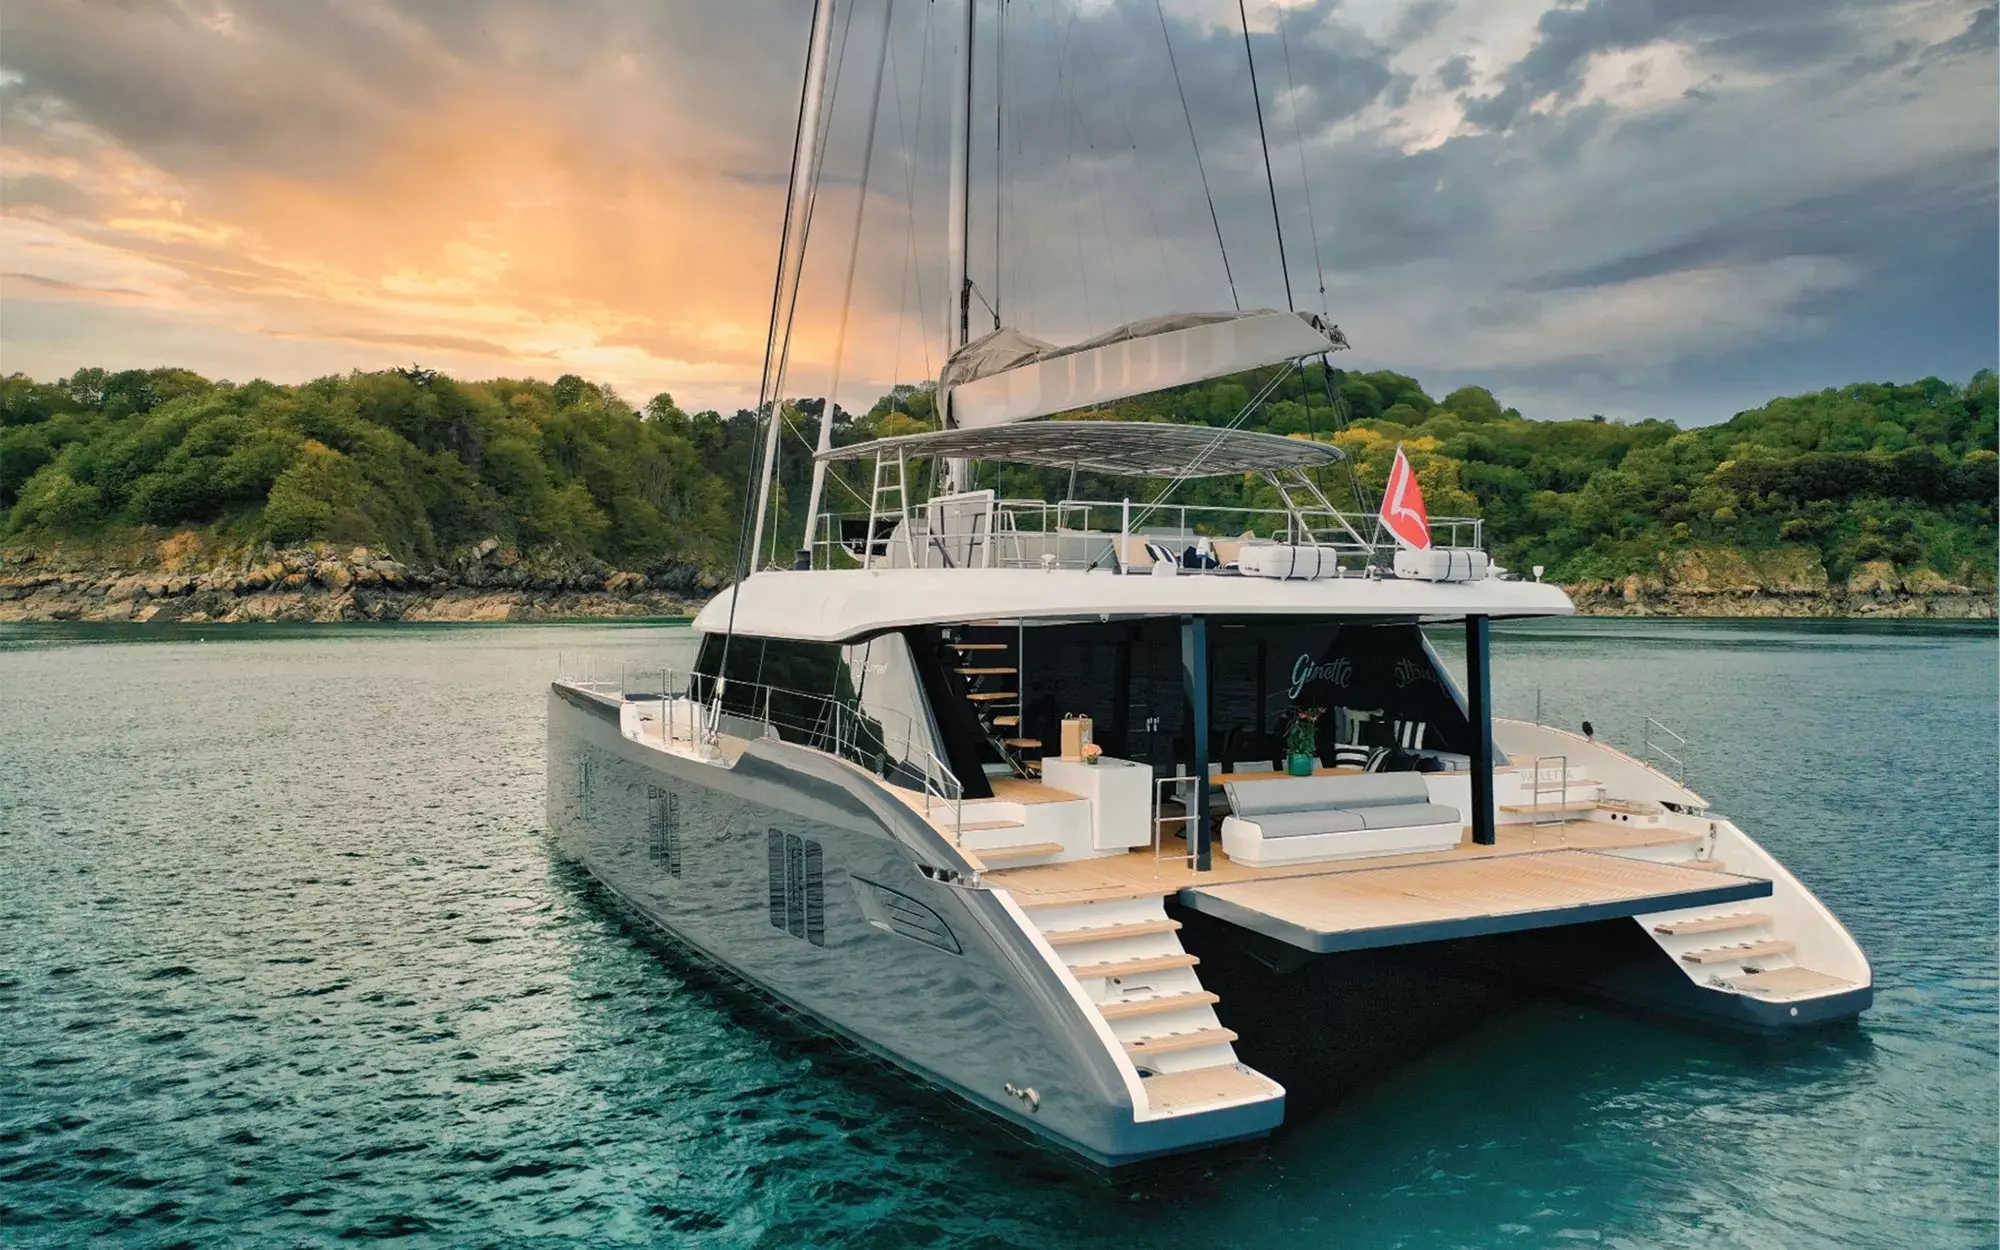 Ginette by Sunreef Yachts - Top rates for a Rental of a private Luxury Catamaran in Australia